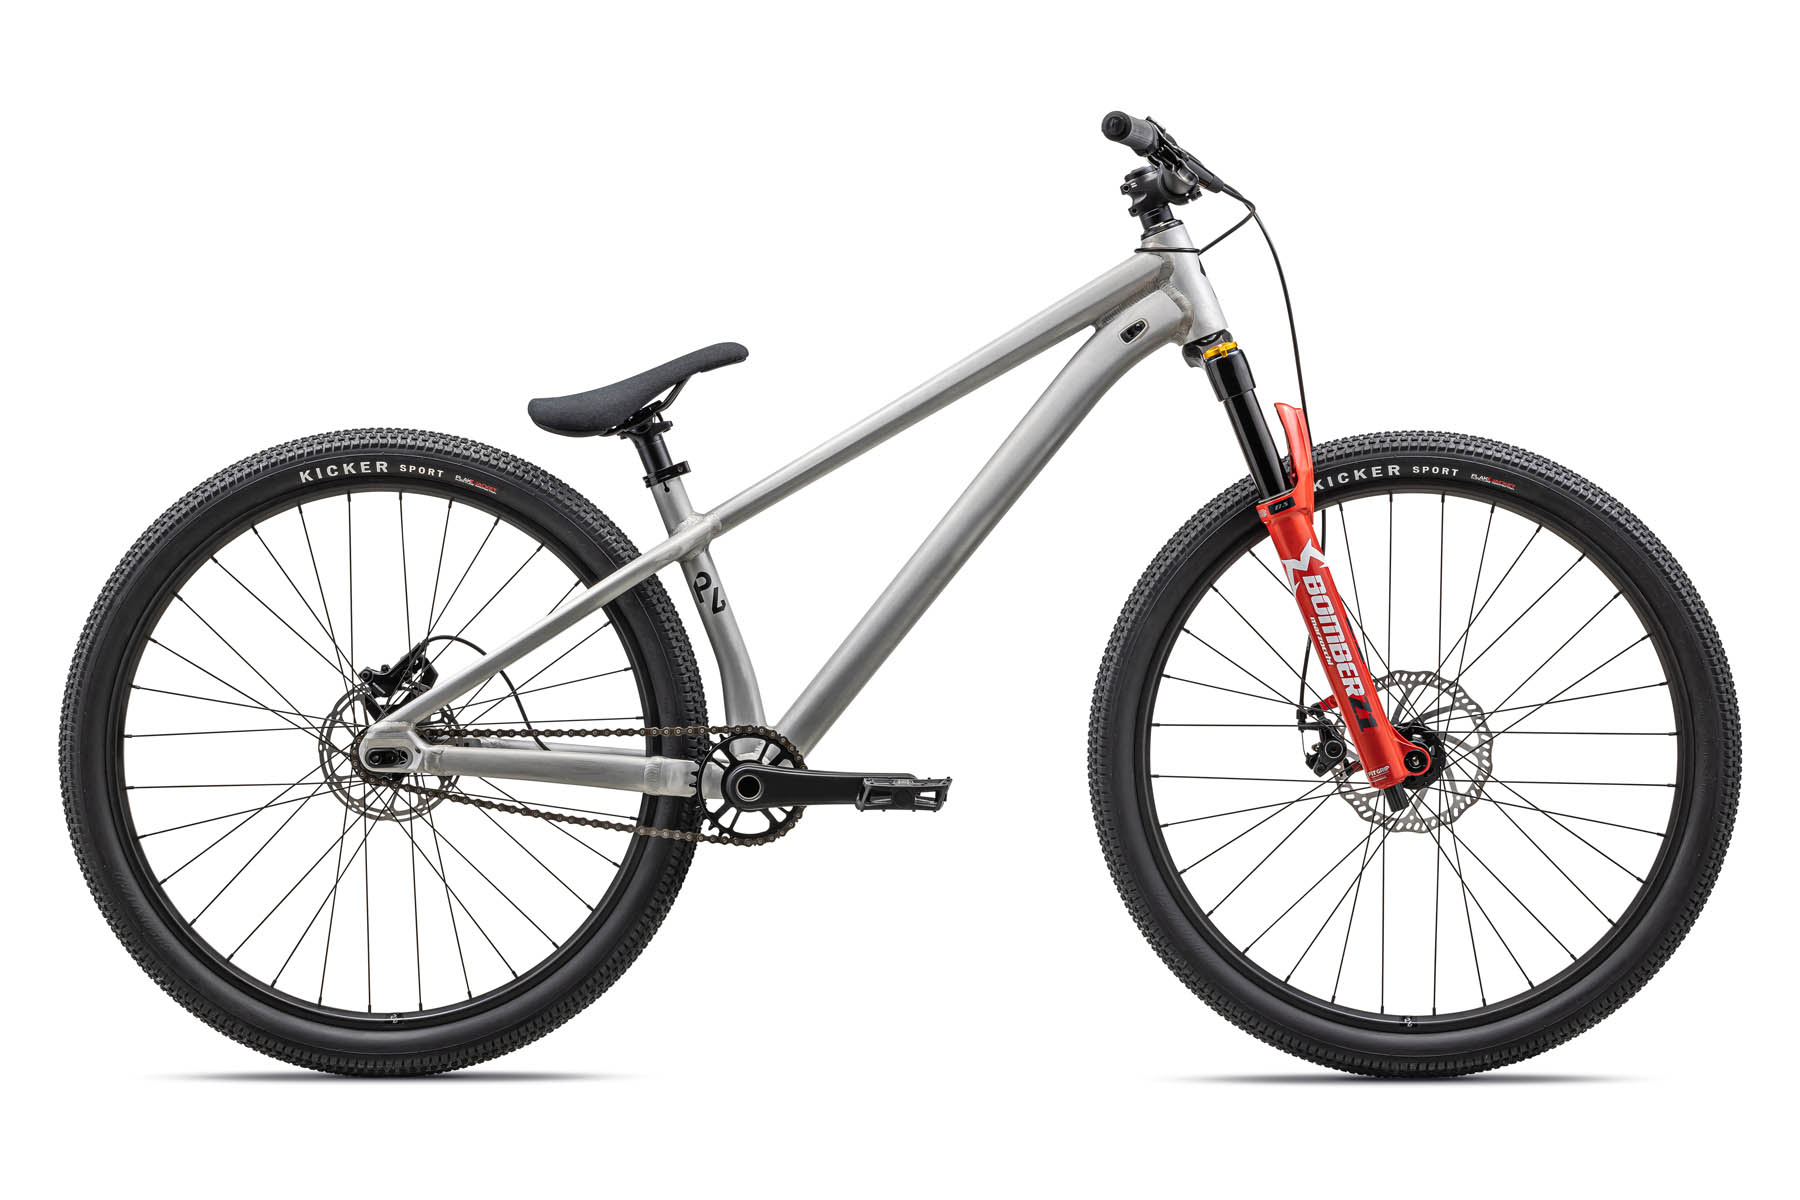 David Golay reviews the 2023 Specialized P.Series for Blister